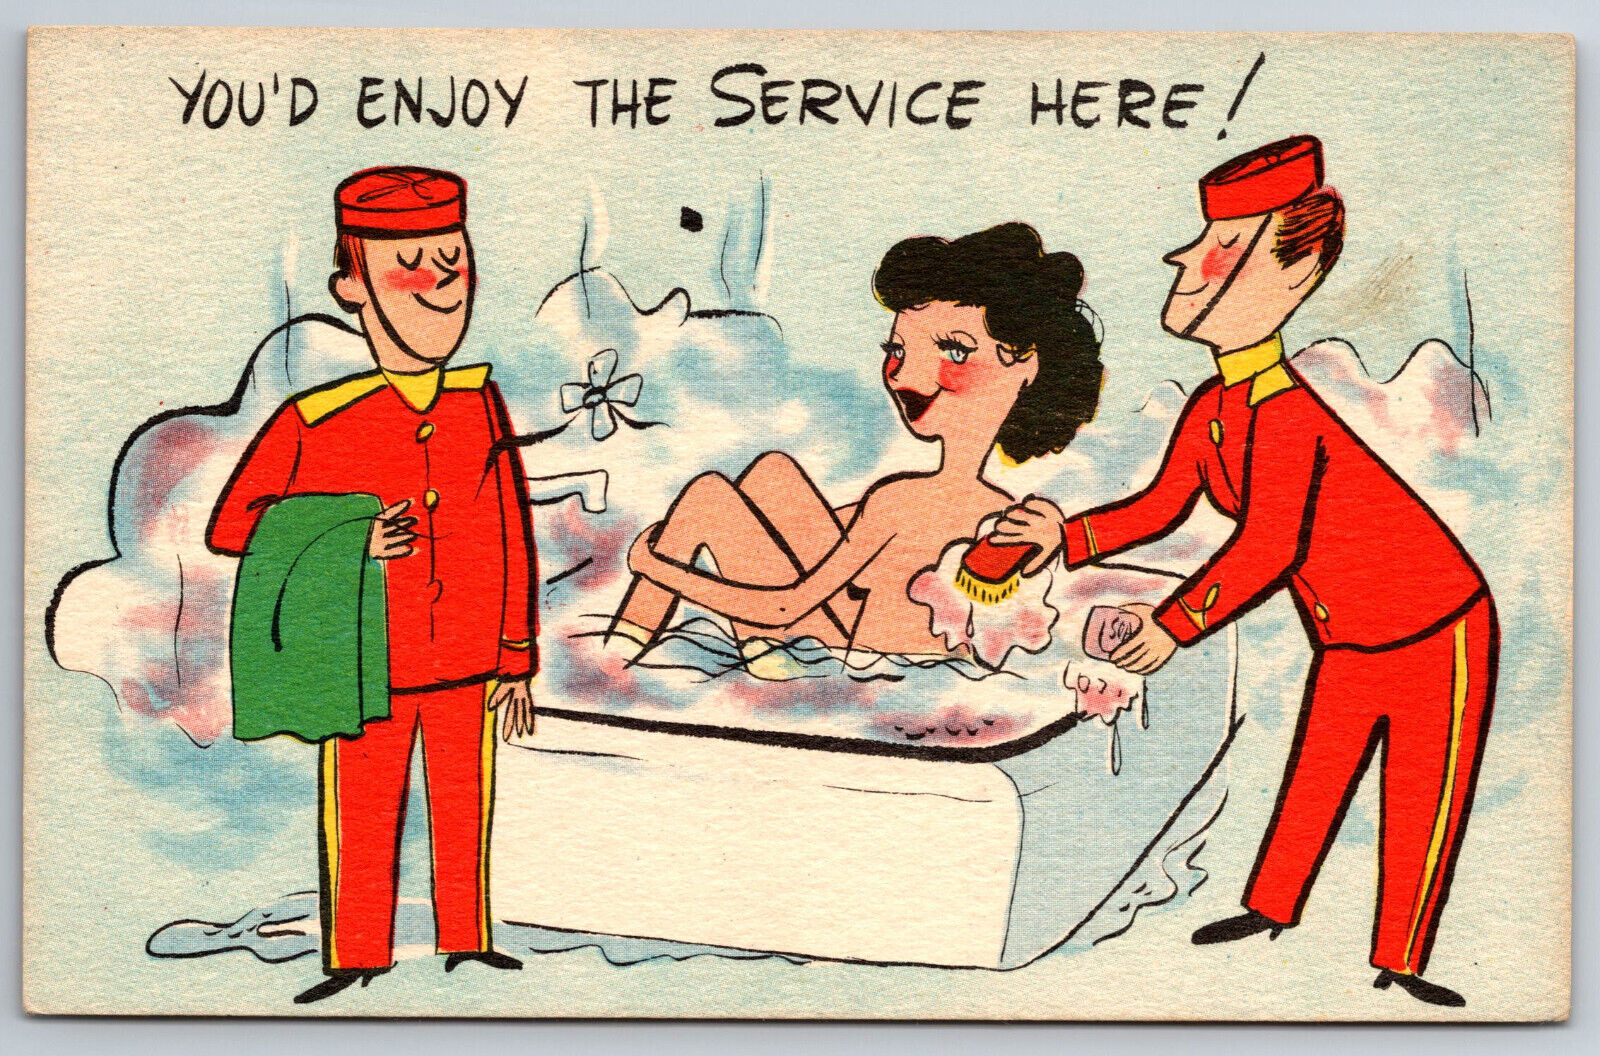 Vintage Postcard Humor Sexy Risque Naked Woman in Tub Men Washing Her Linen